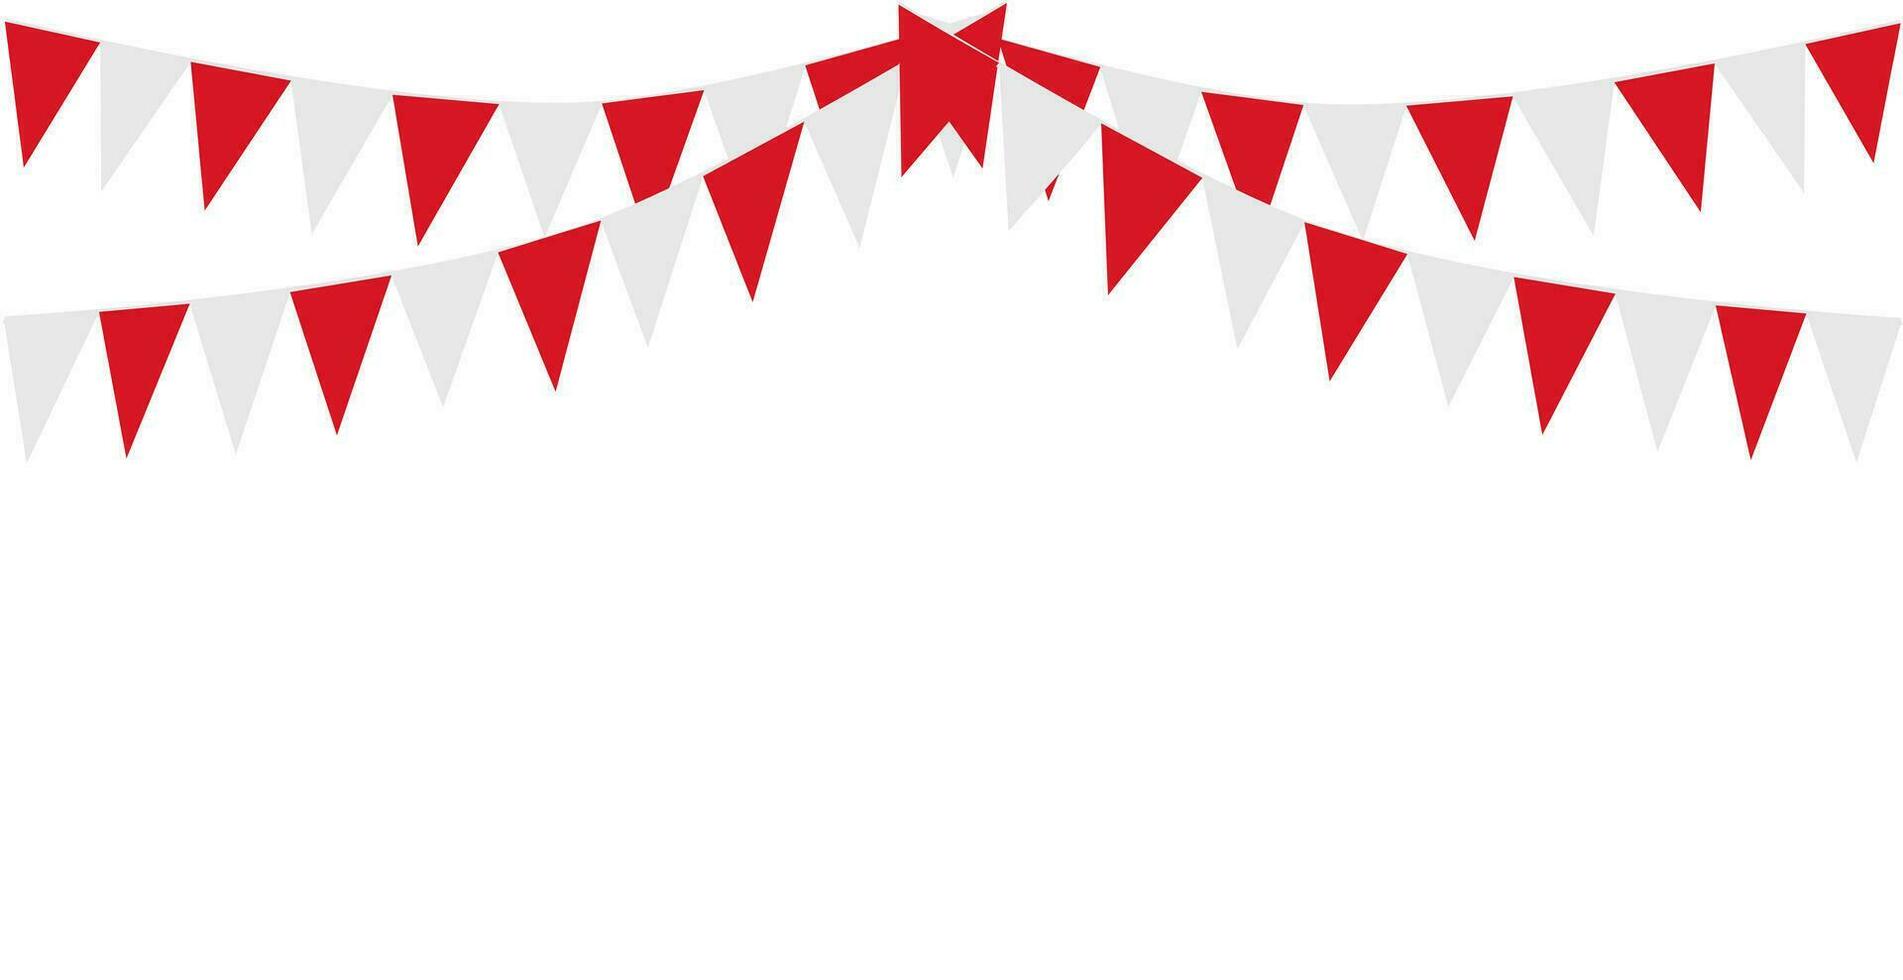 Bunting Hanging Red and White Flag Triangles Banner Background. Bunting flags for celebration, party, fair, market, sale. China, Canada, Swiss, Denmark concepts. vector